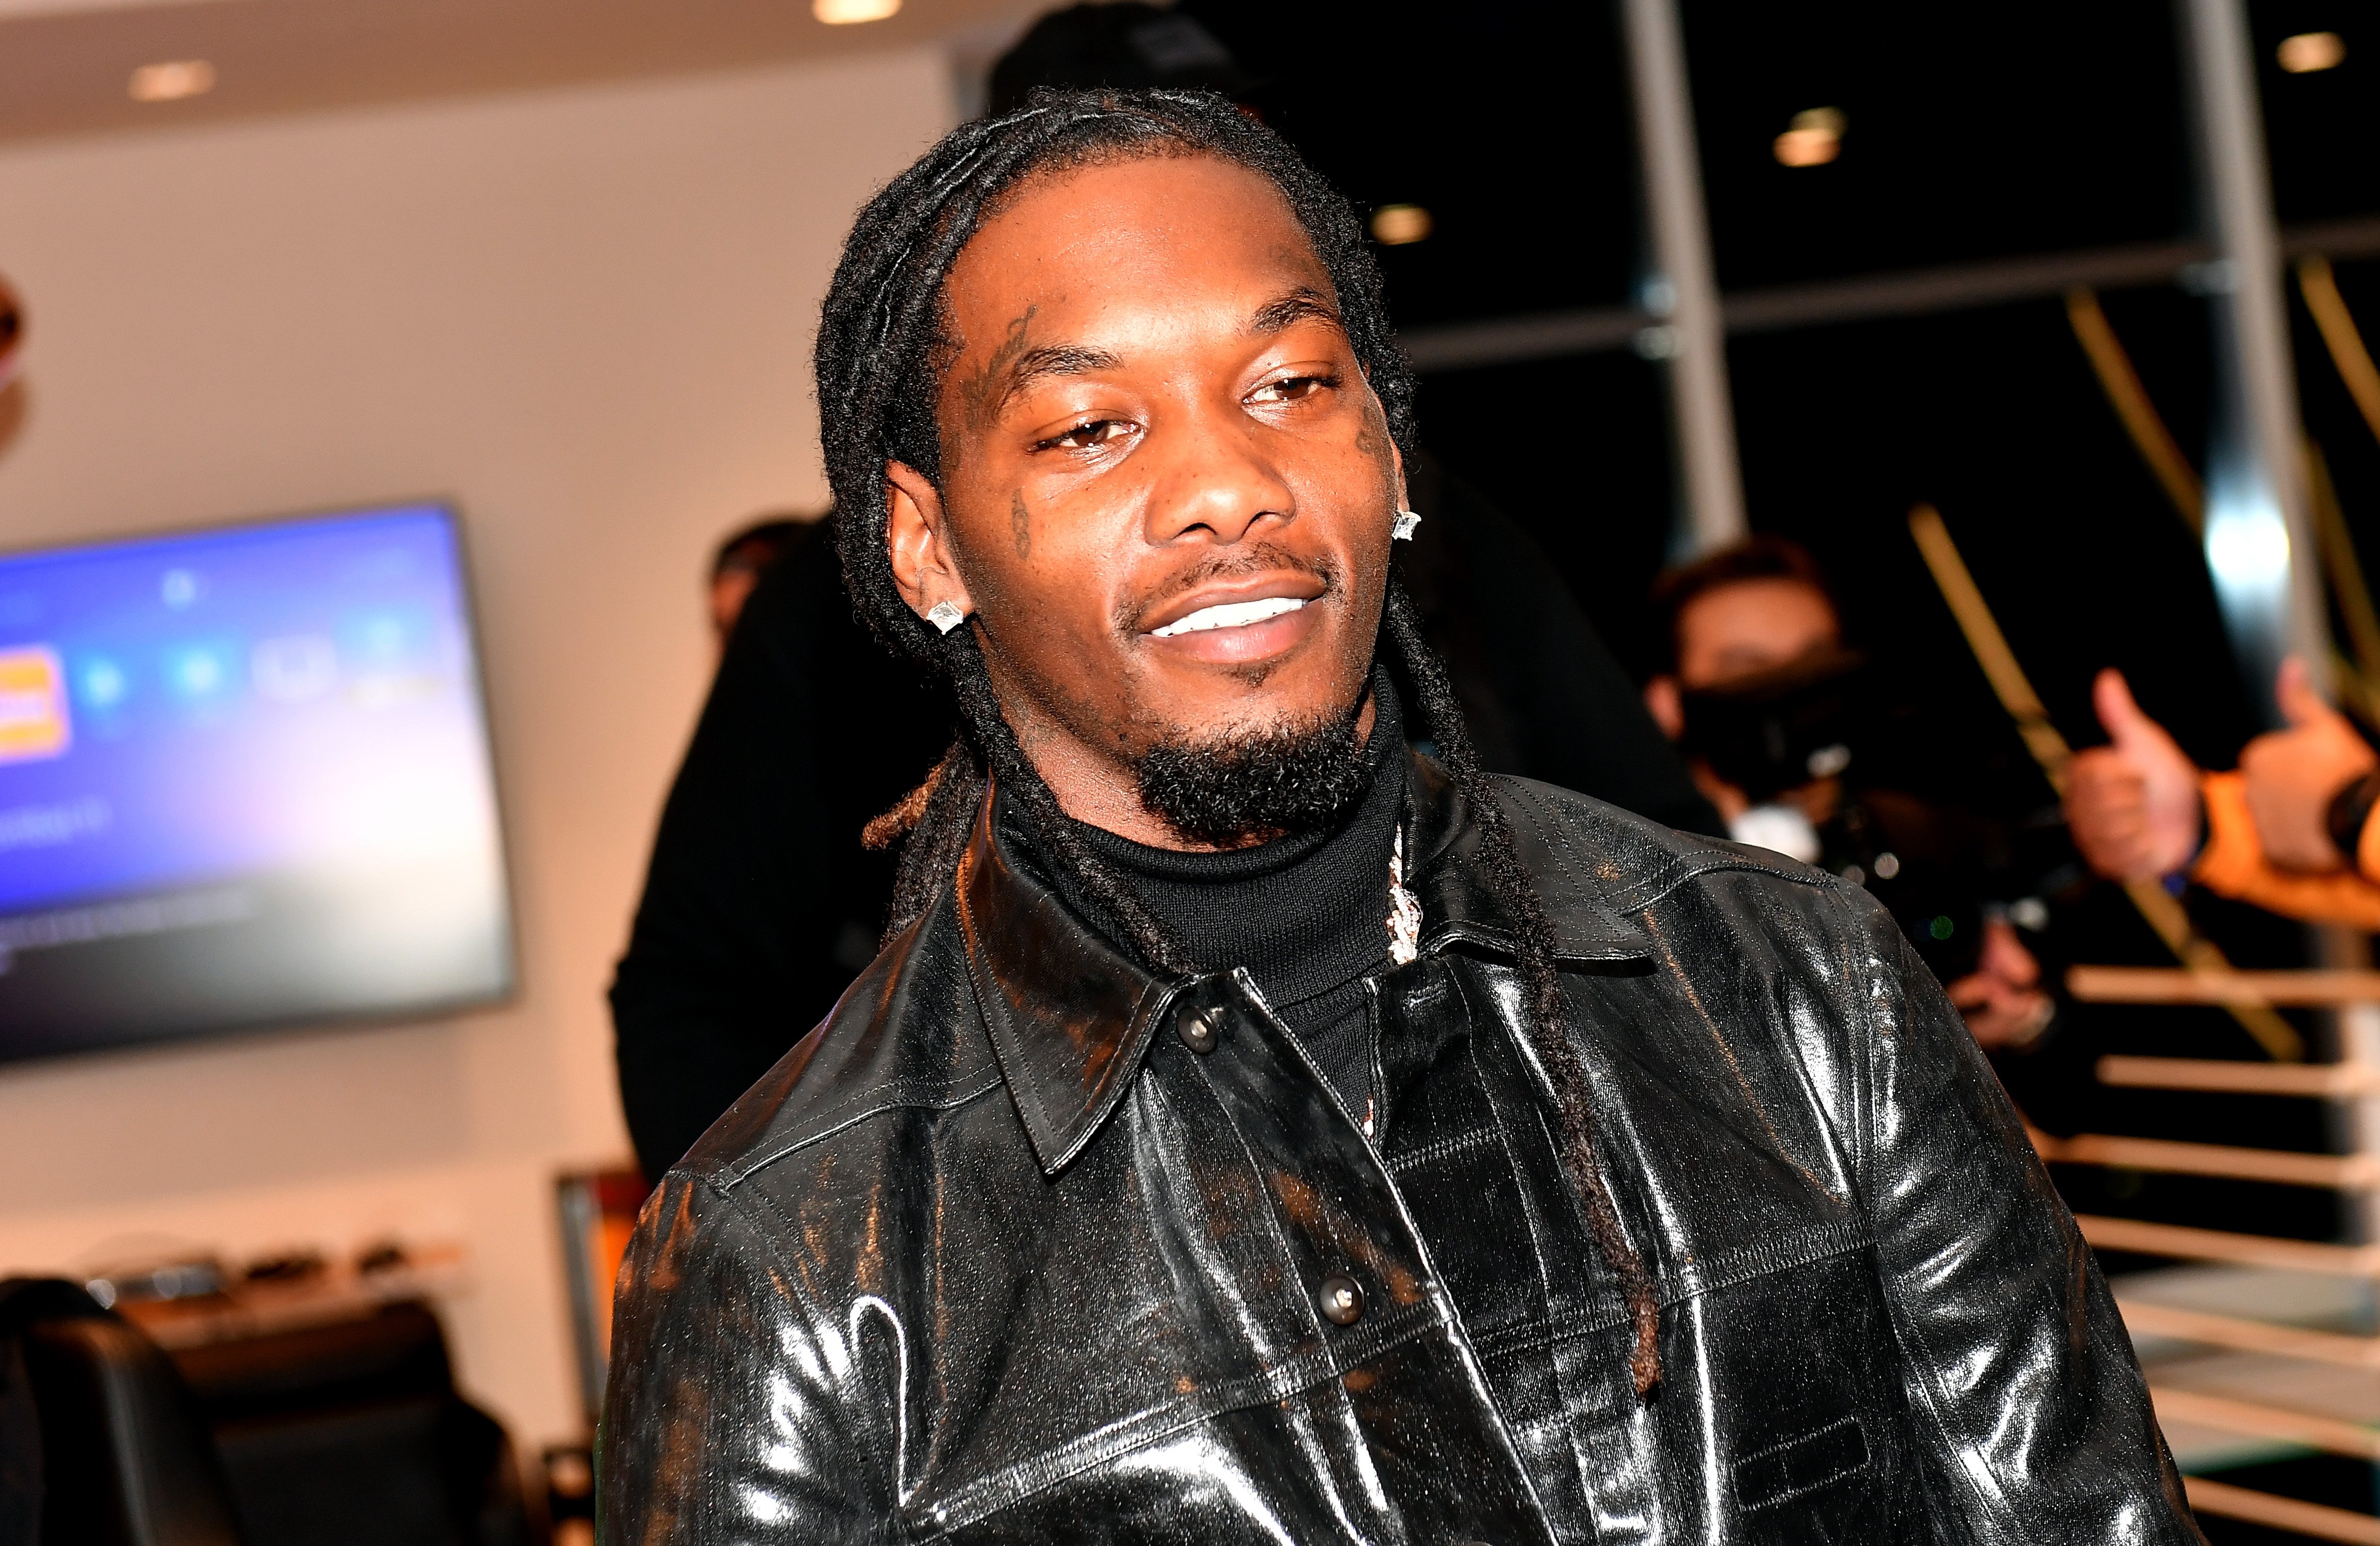 Offset attends AXR+EXP Live Concert Experience at Coda rooftop, on October 16, 2020, in Atlanta, Georgia. | Source: Getty Images